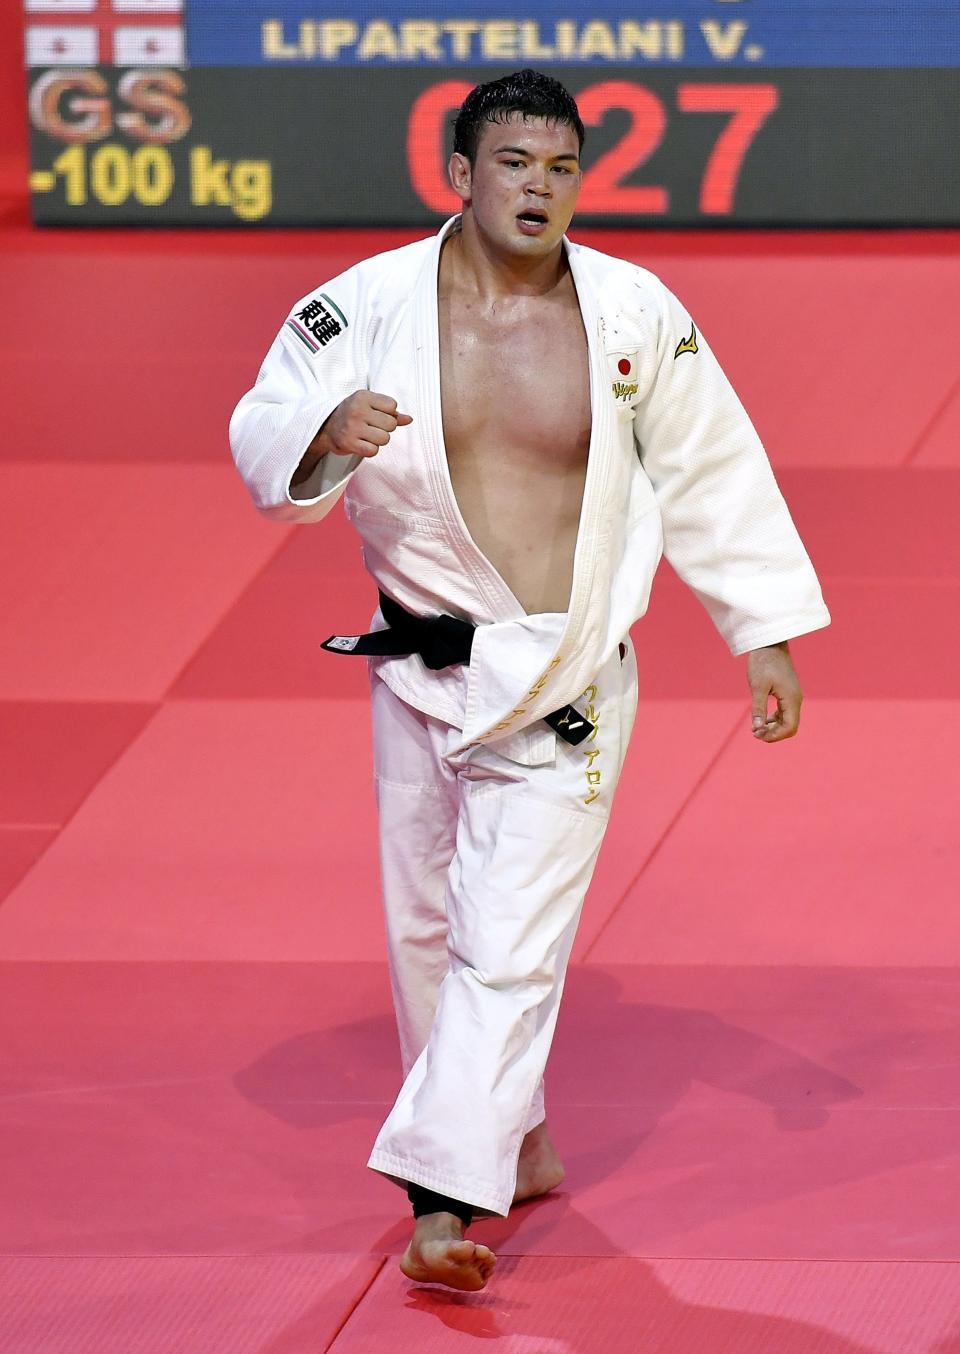 FILE - Aaron Wolf of Japan walks off the mat after winning against Varlam Liparteliani of Georgia in the men's 100kg category at the World Judo Championships in Budapest, Hungary, in this Saturday, Sept. 2, 2017, file photo. Judo is coming home at the Tokyo Olympics “It’s such a lucky opportunity to attend the Olympics in Japan where judo was born," Japanese Olympian Aaron Wolf recently told Japan's Sportiva magazine. “I want to win on this stage. My goal is a gold medal.” (Tibor Illyes/MTI via AP, File)